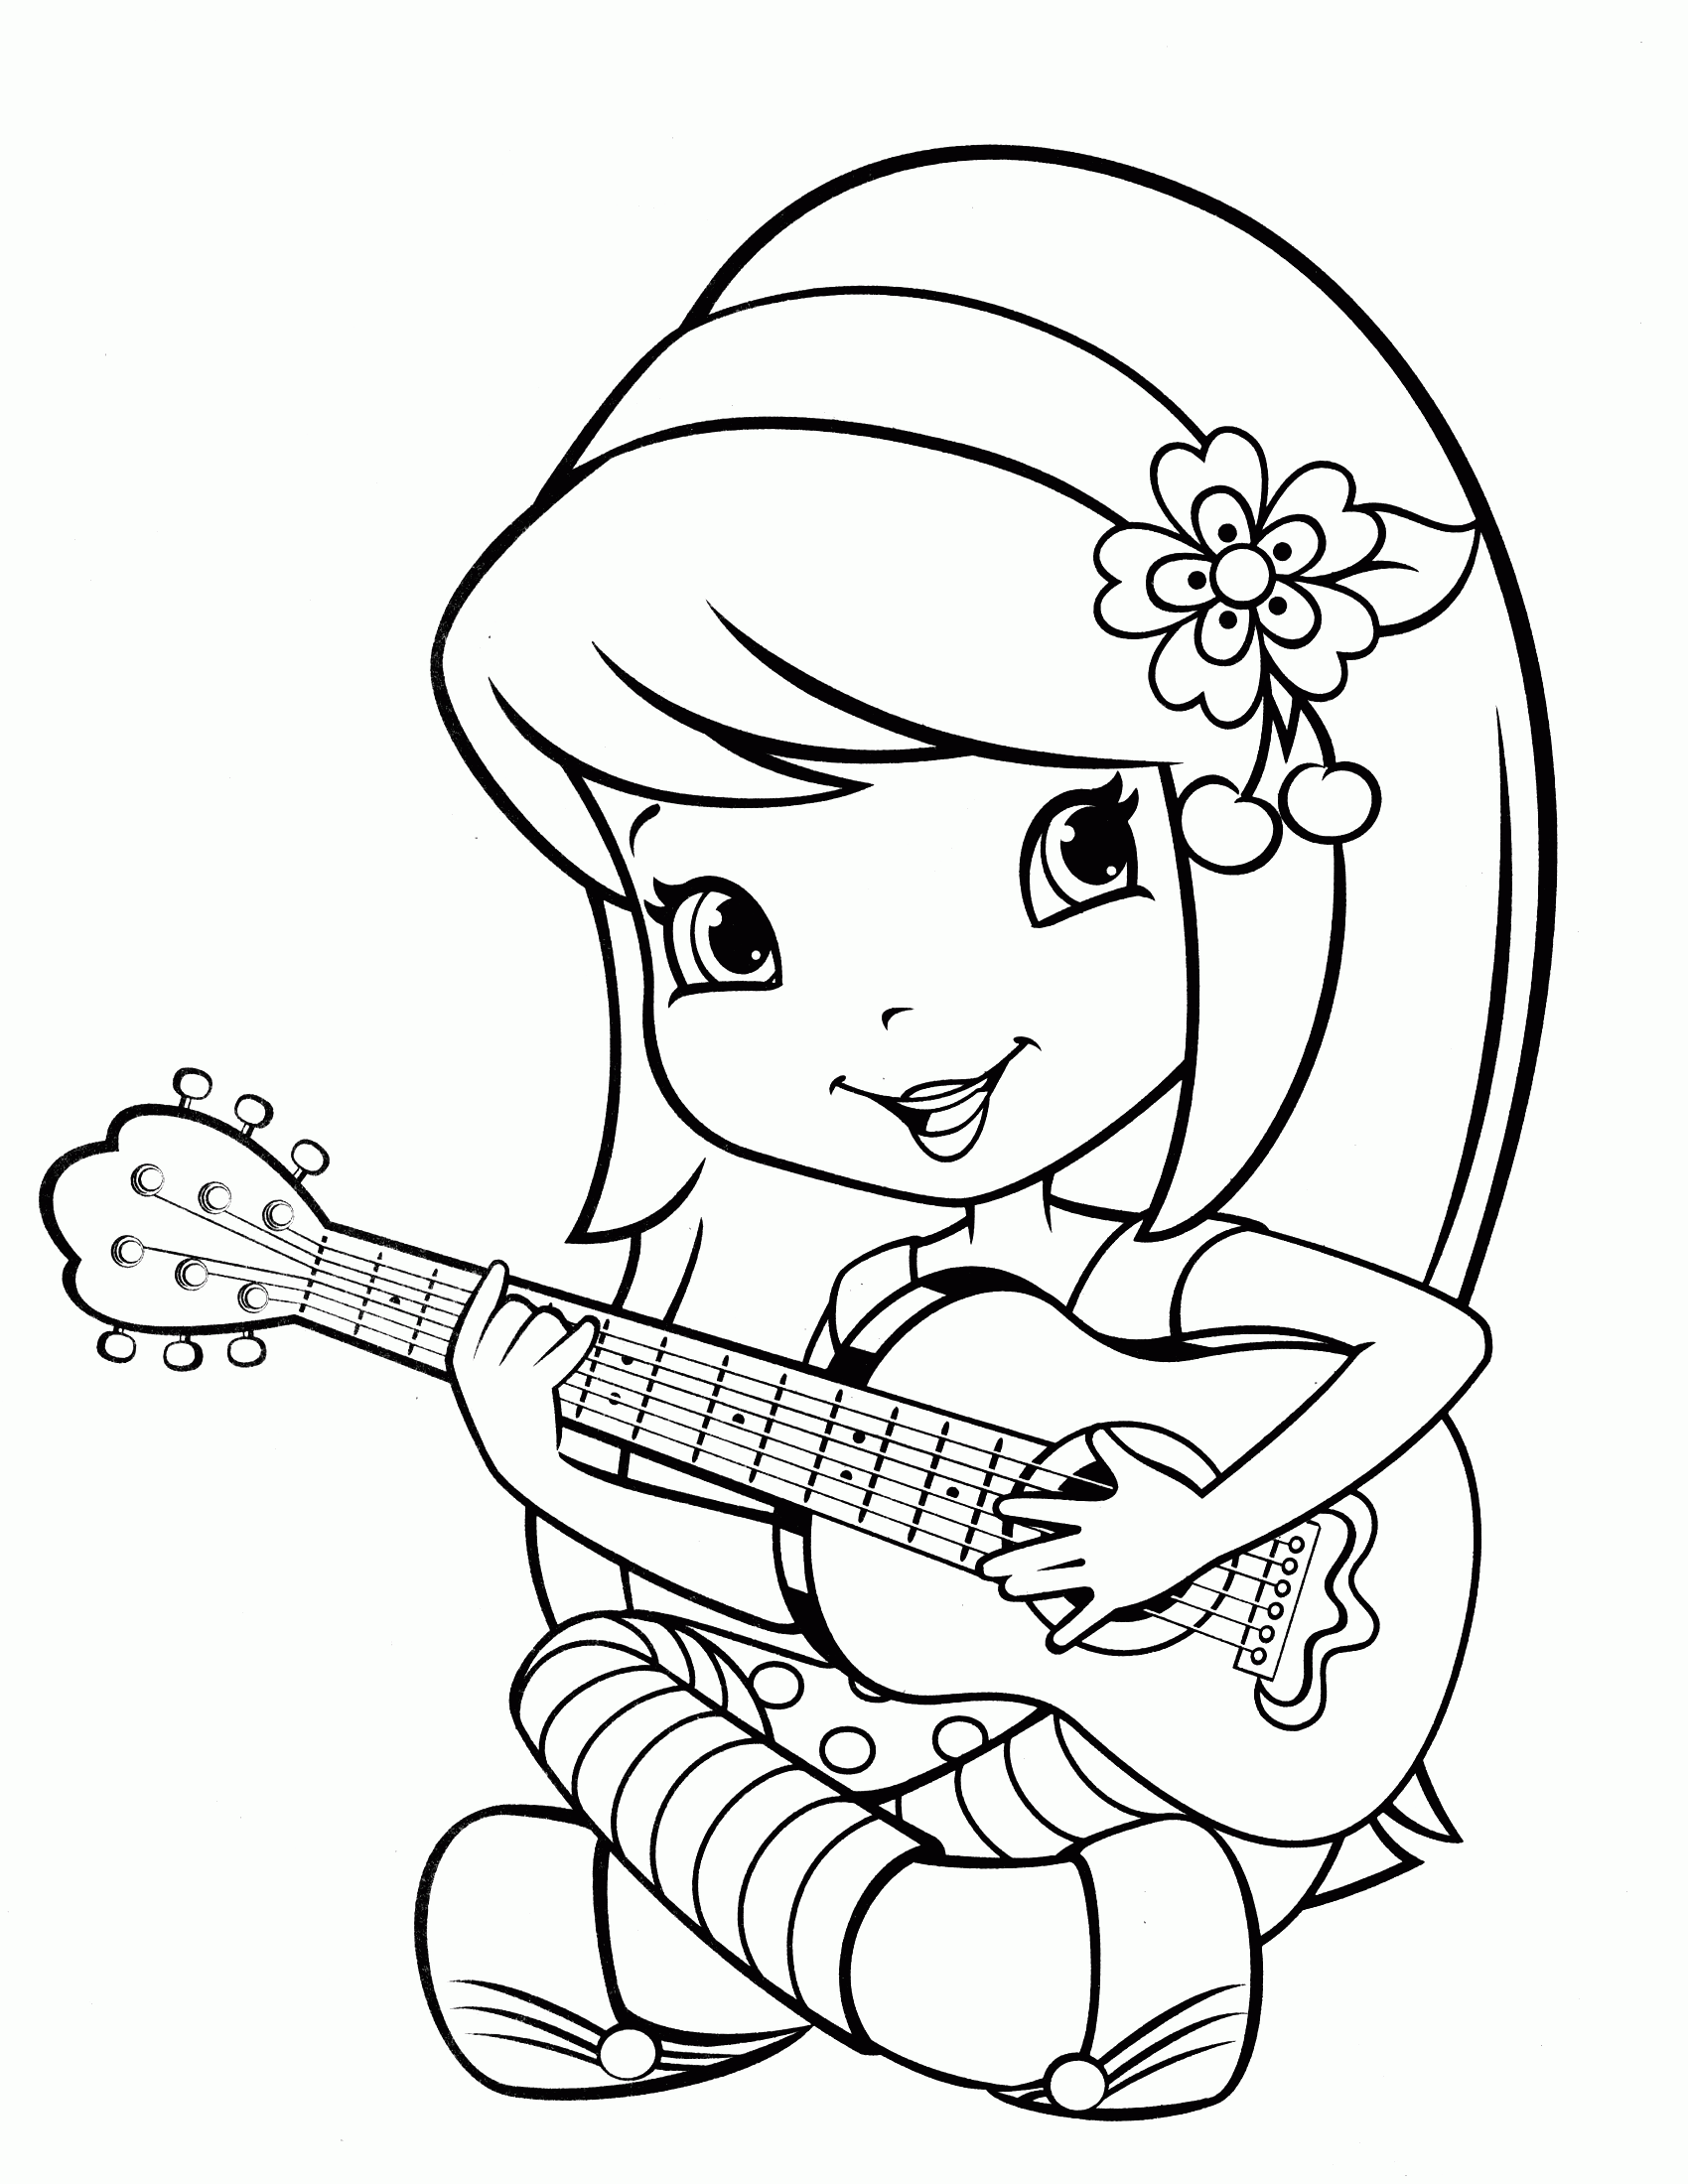 Strawberry Shortcake Coloring Pages | Only Coloring Pages